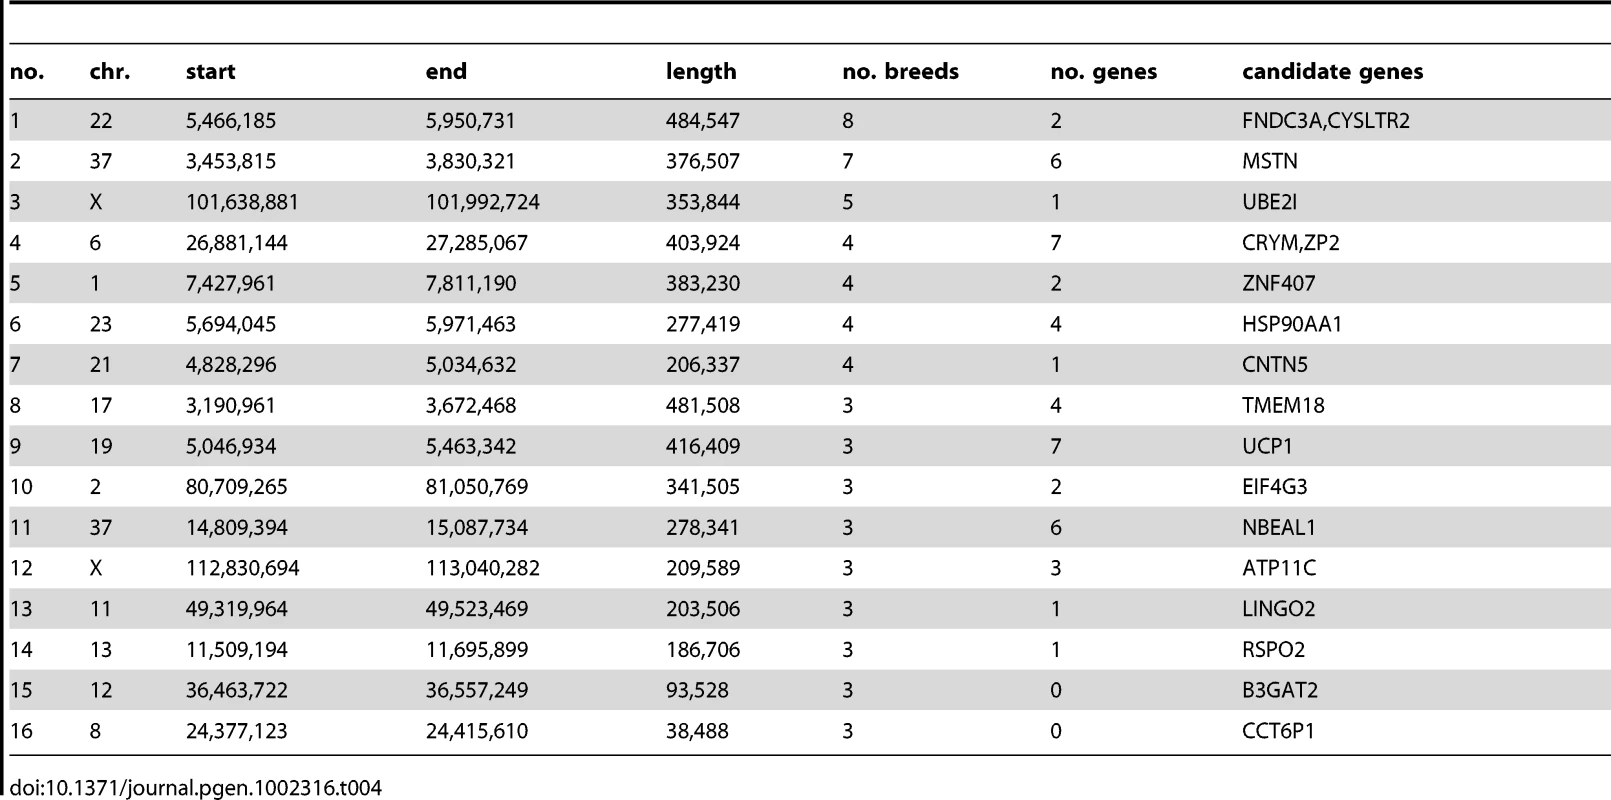 Description of regions with identical fixed haplotypes across multiple breeds.